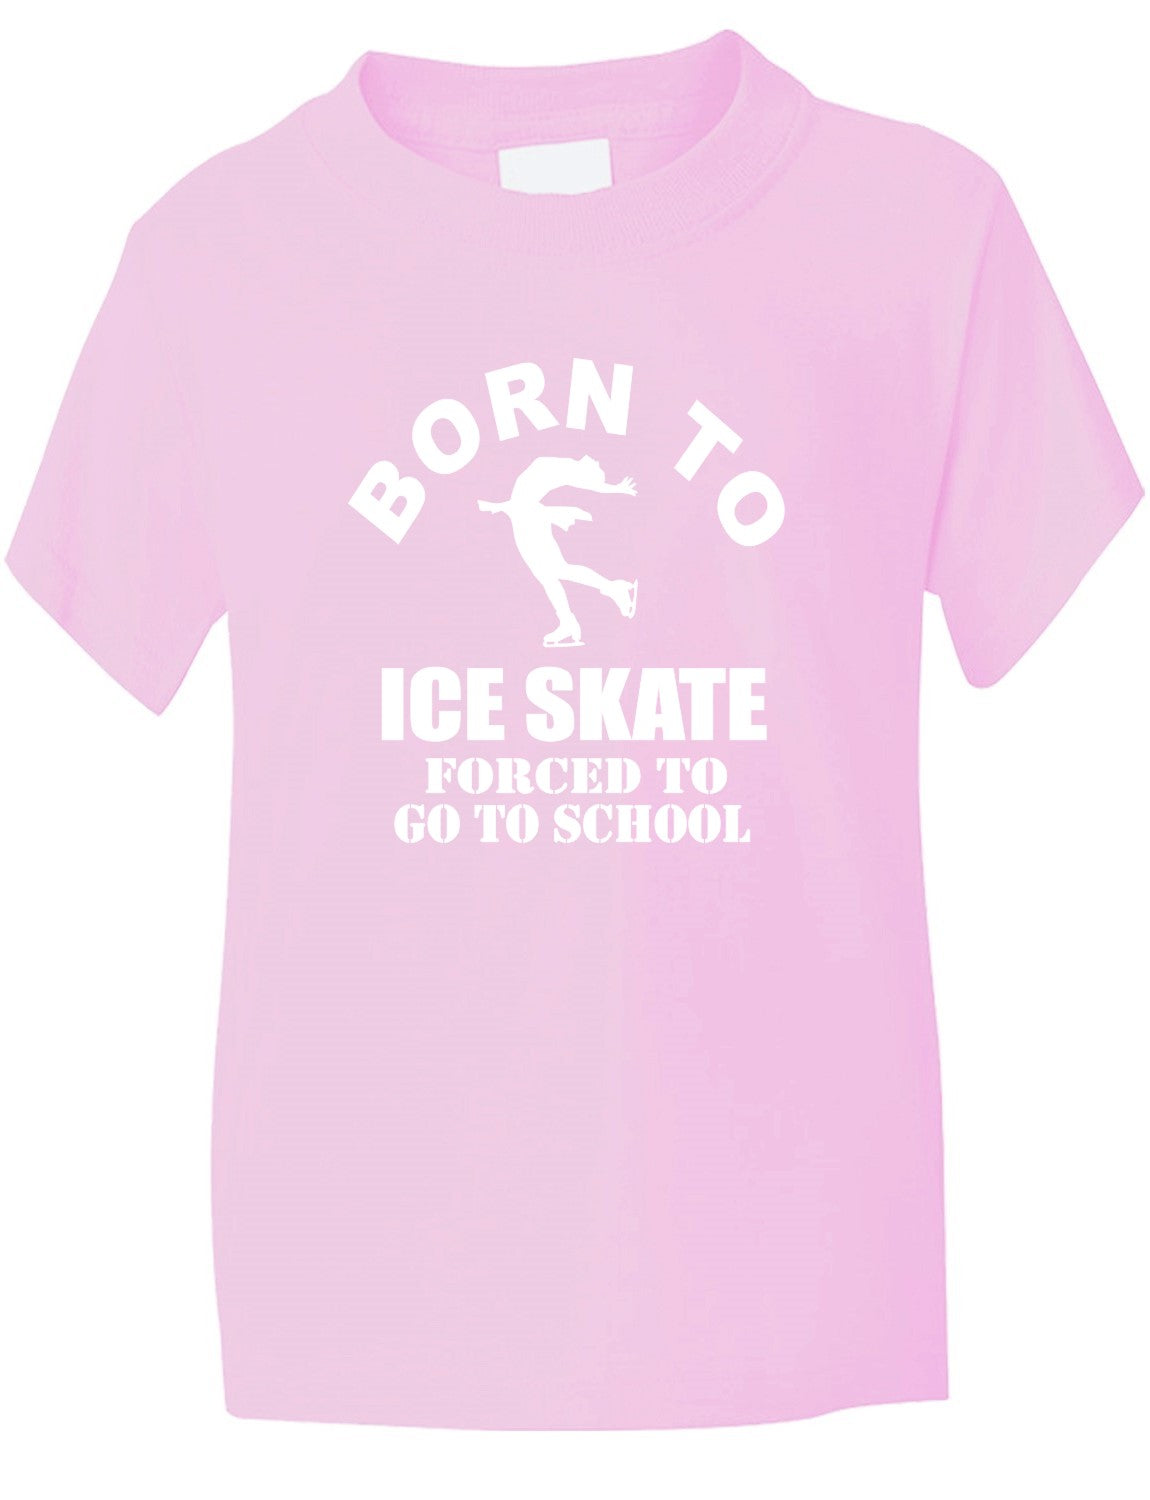 Born to Ice Skate Forced To Go To School Kids T-Shirt